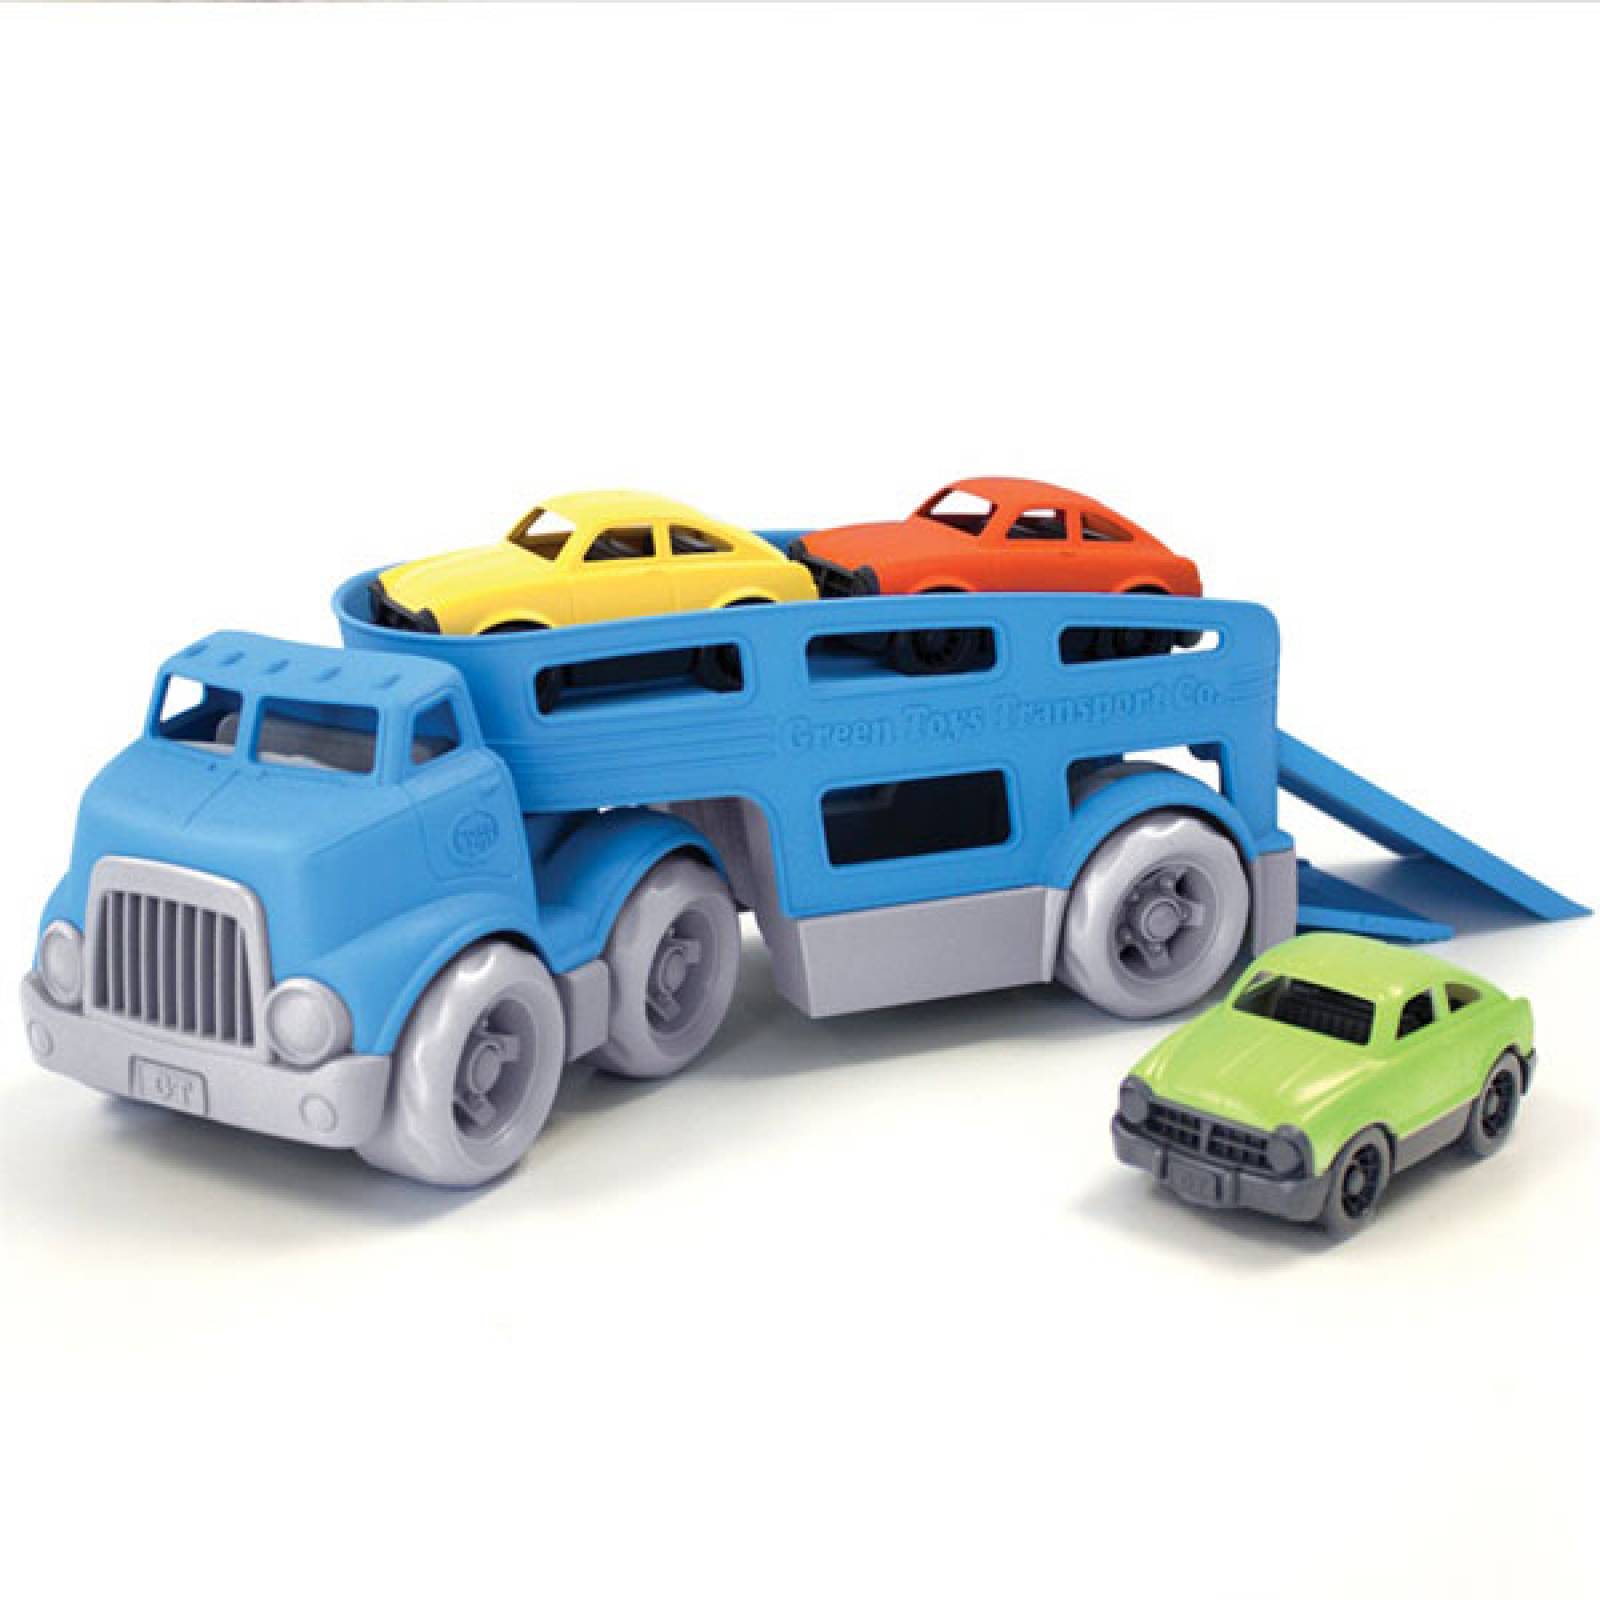 Car Carrier By Green Toys - Recycled Plastic 3+ thumbnails